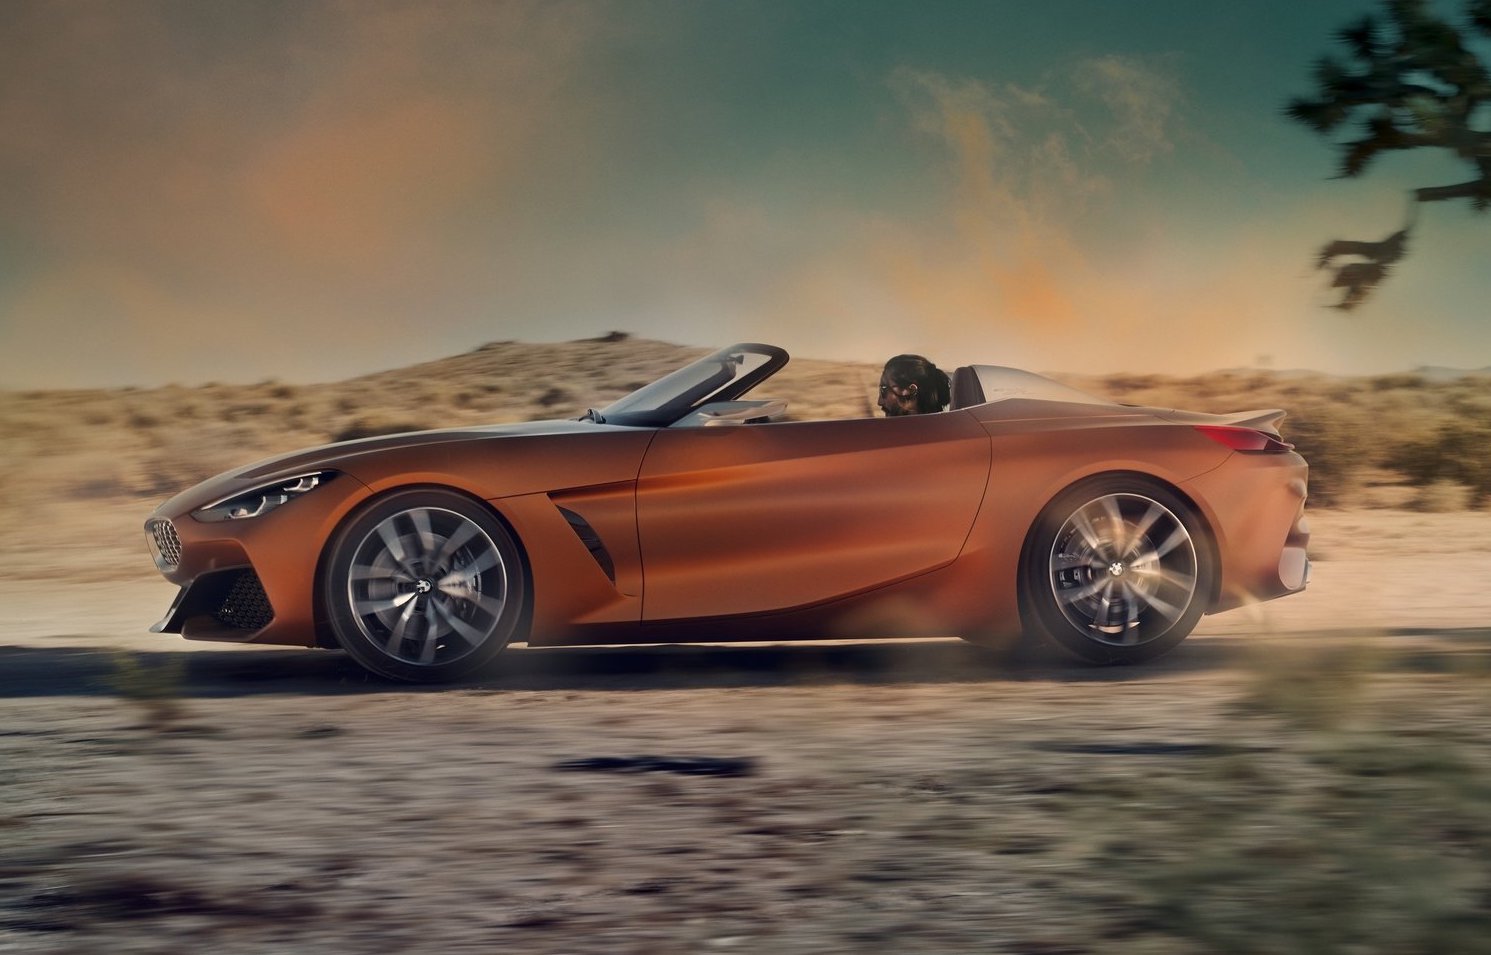 BMW Z4 Concept revealed, production model coming in 2018